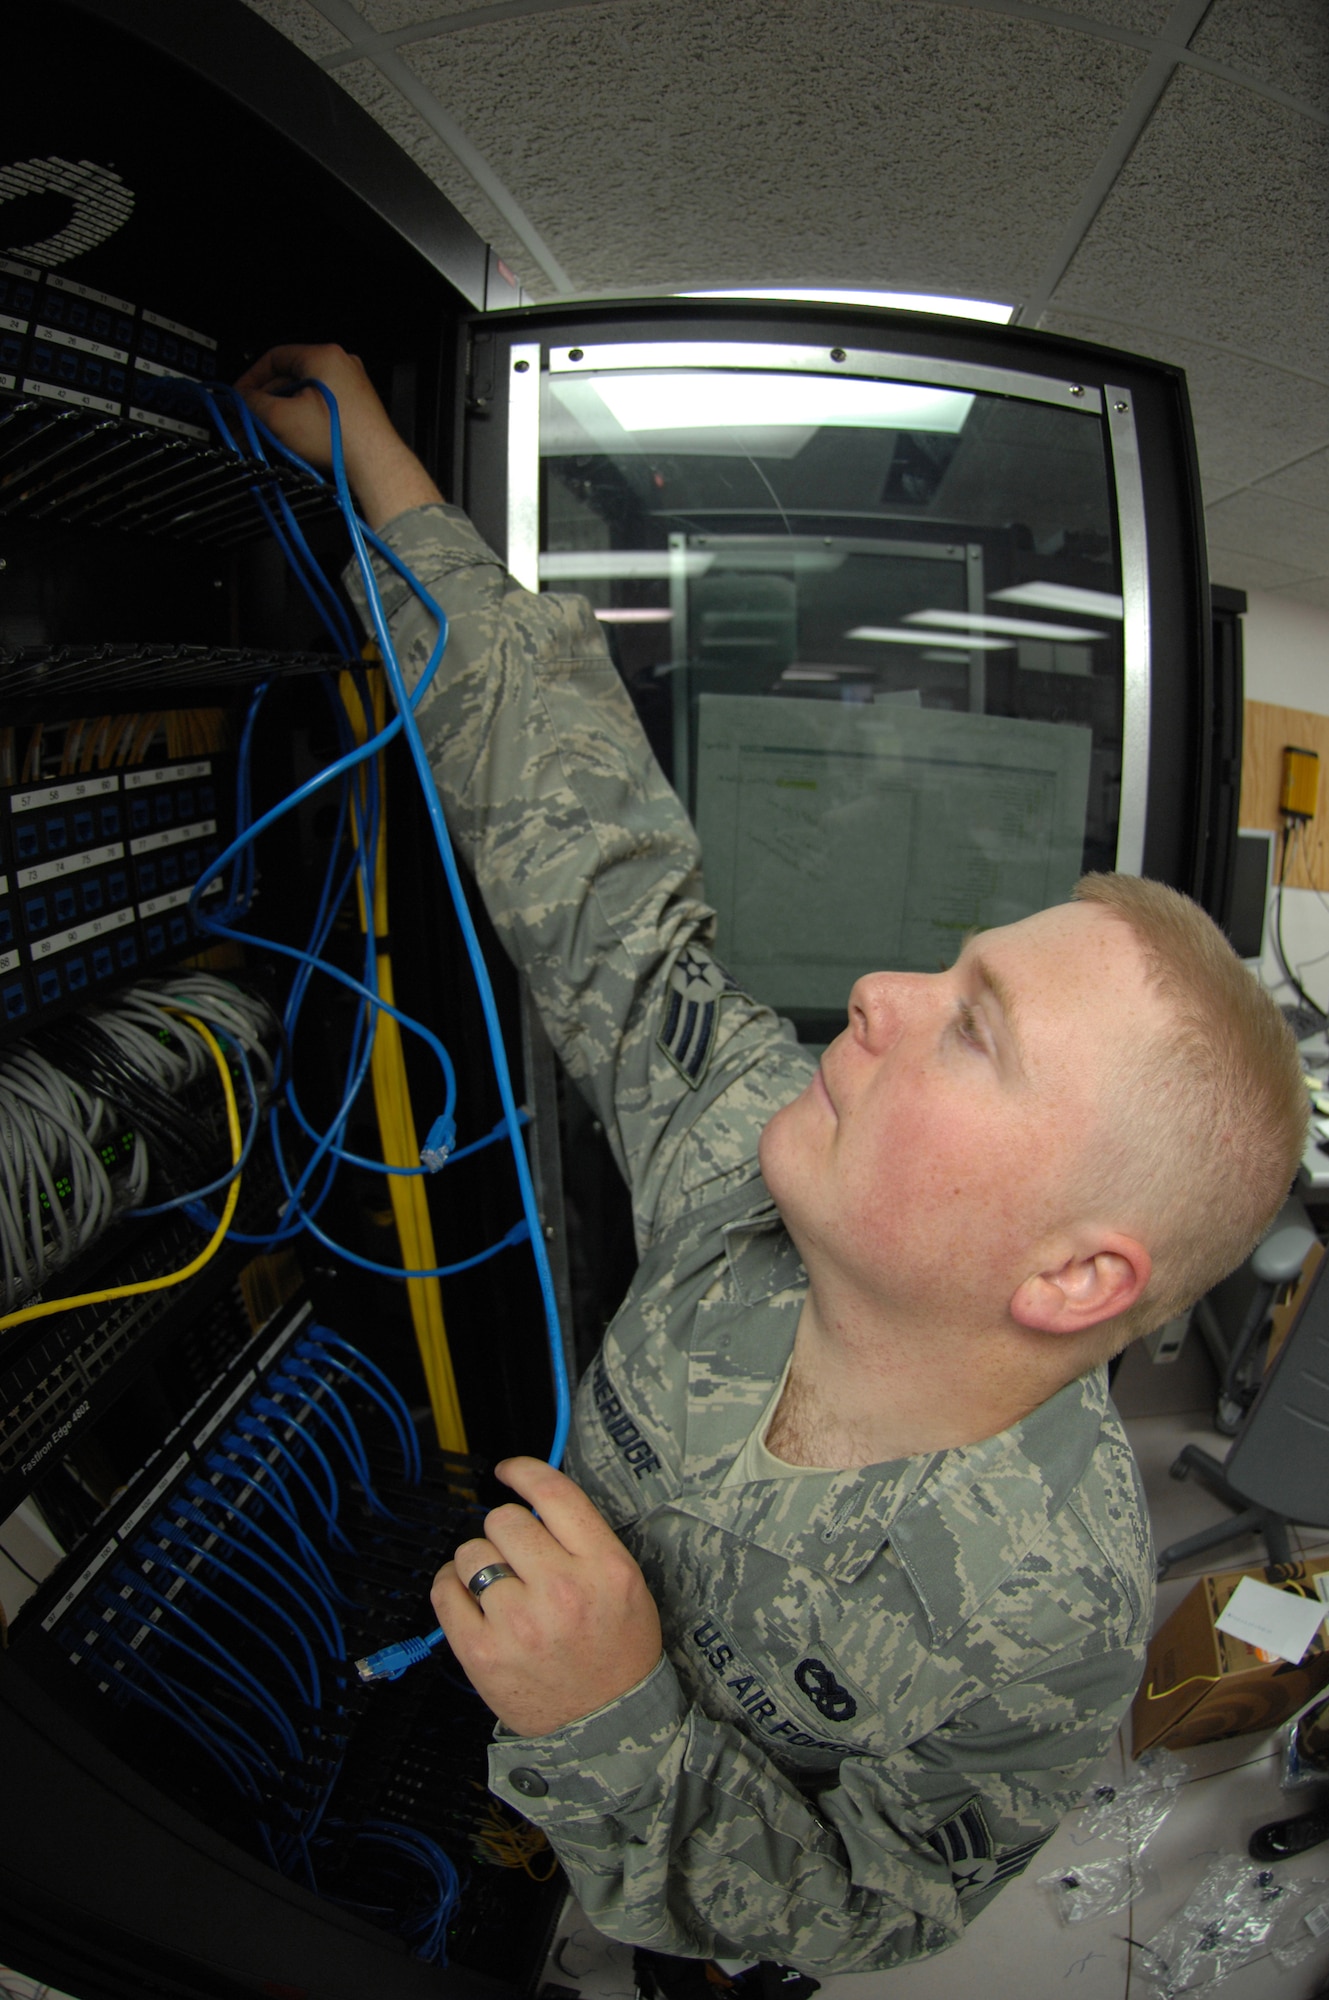 Senior Airman Etheridge, plugs in Cat-5 cable to the existing patch panel at Holloman Air Force Base, N.M. May 05. SrA Etheridge is an infrastructure technician assigned to the 49th Communications Squadron.
(U.S. Air Force photo/ Senior Airman Anthony Nelson Jr)  
